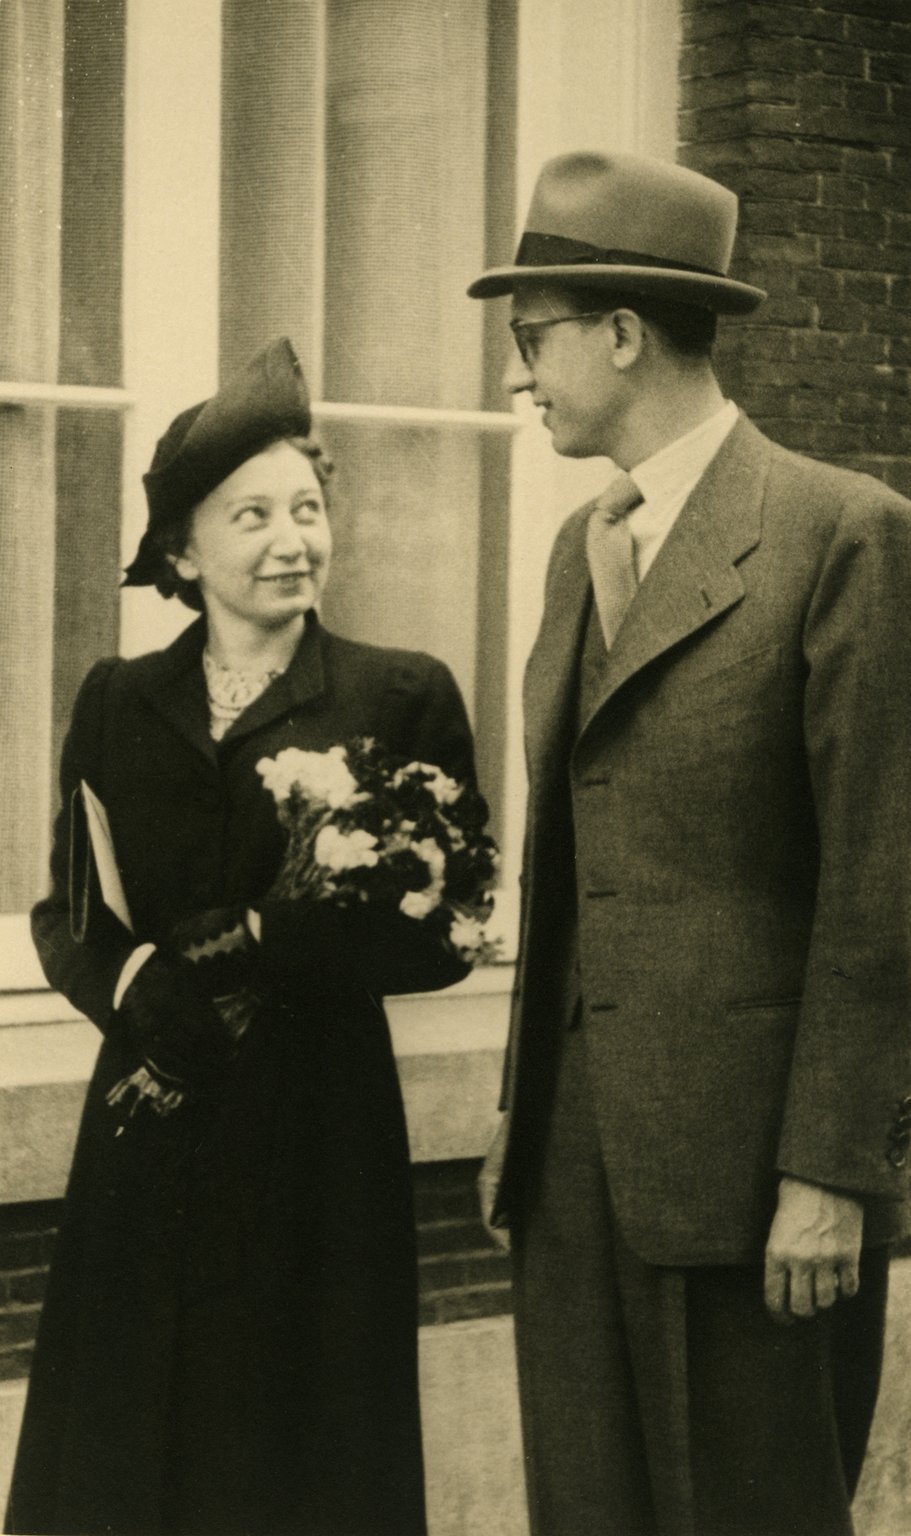 The wedding of Miep and Jan Gies, 16 July 1941.